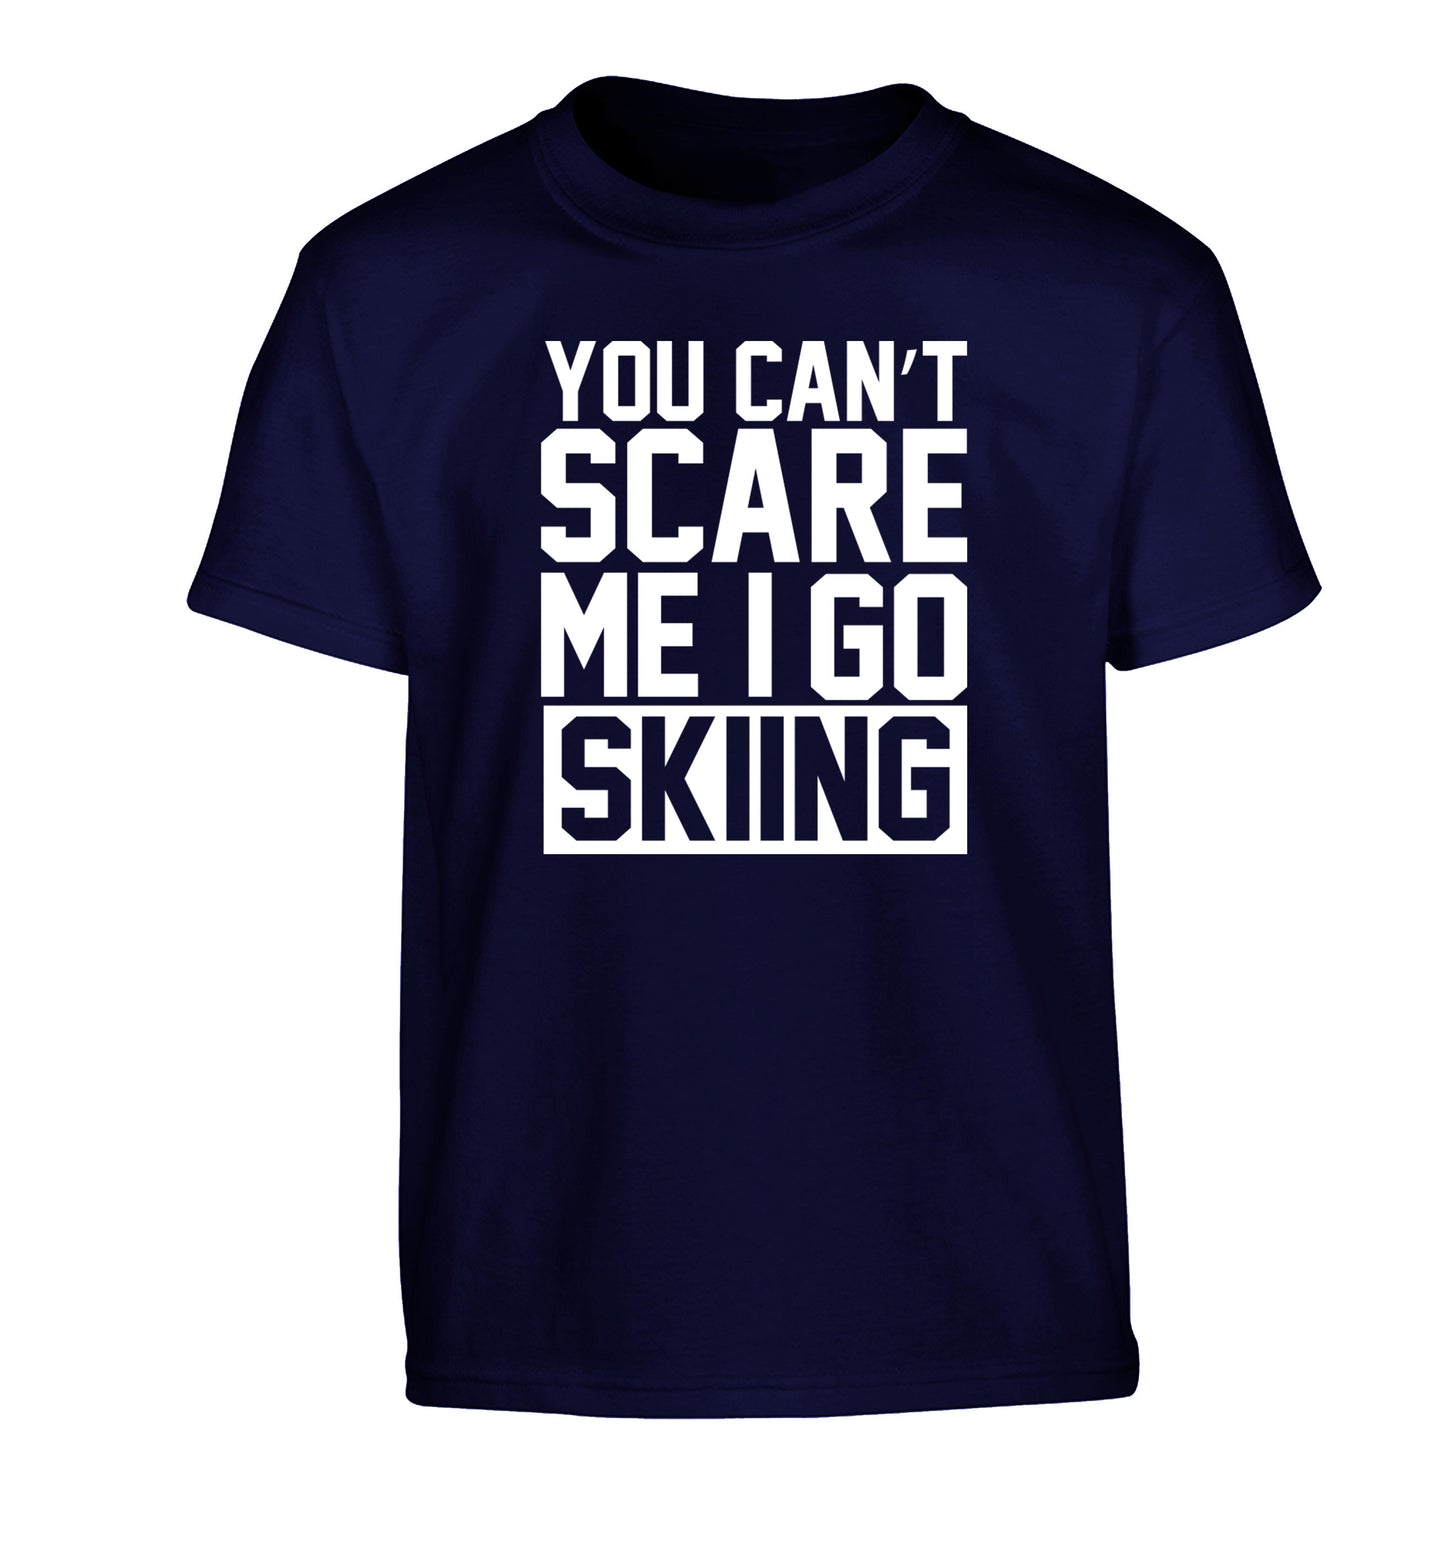 You can't scare me I go skiing Children's navy Tshirt 12-14 Years